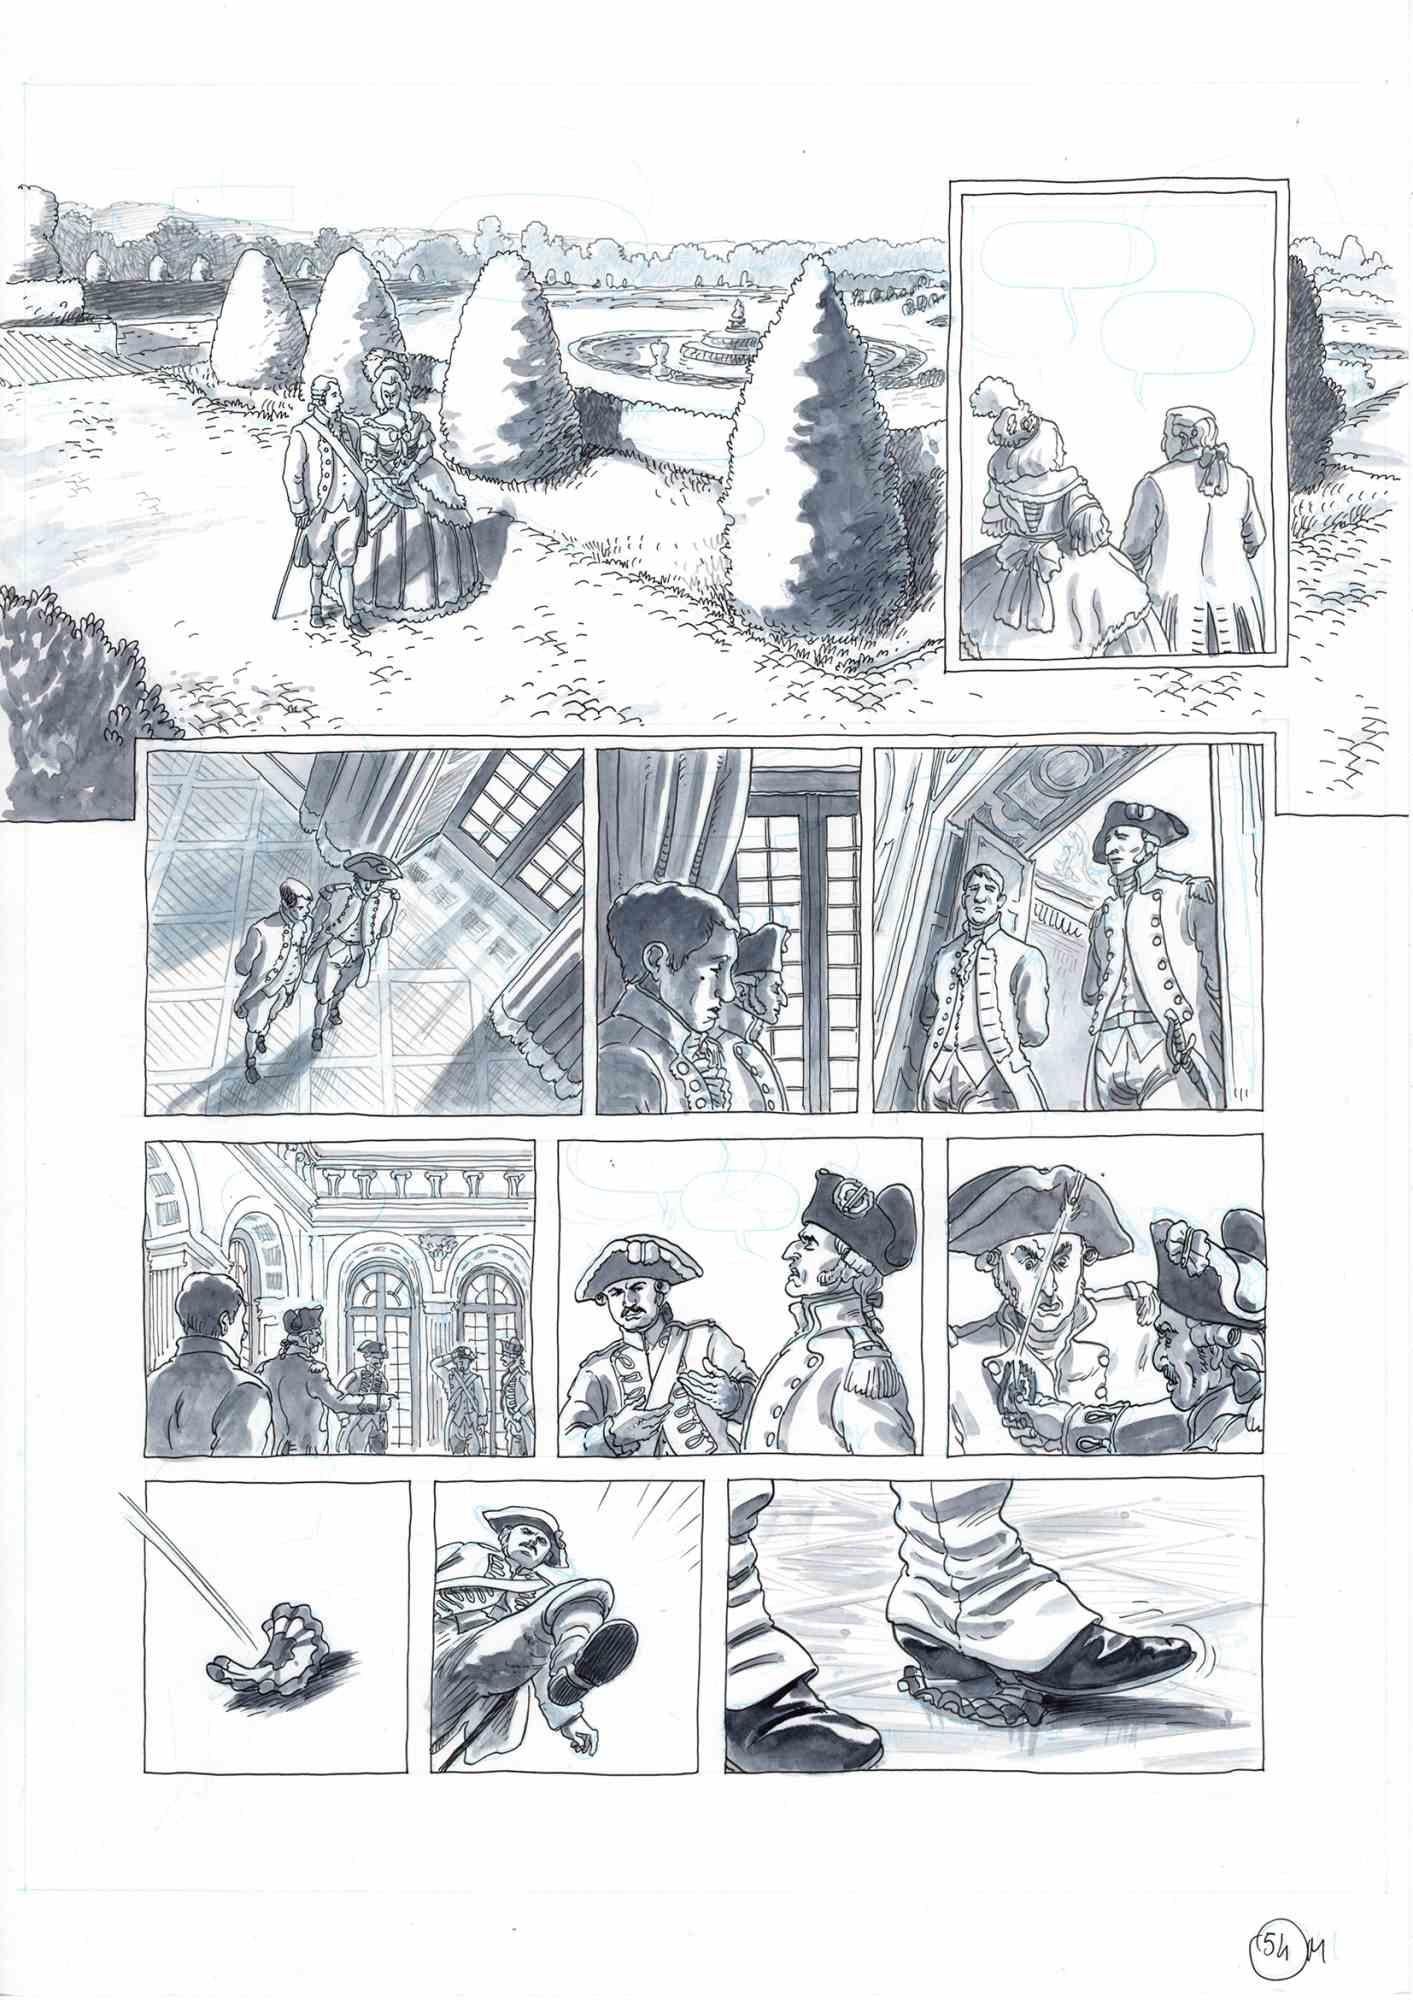 This work entitled "Revolution rejected" is a comic board belonging to the graphic novel published by Glènat Edition in 2019 "1789 - La mort d'un monde". The work was made by Vincenzo Bizzarri between 2018 and 2019, total work duration of the entire